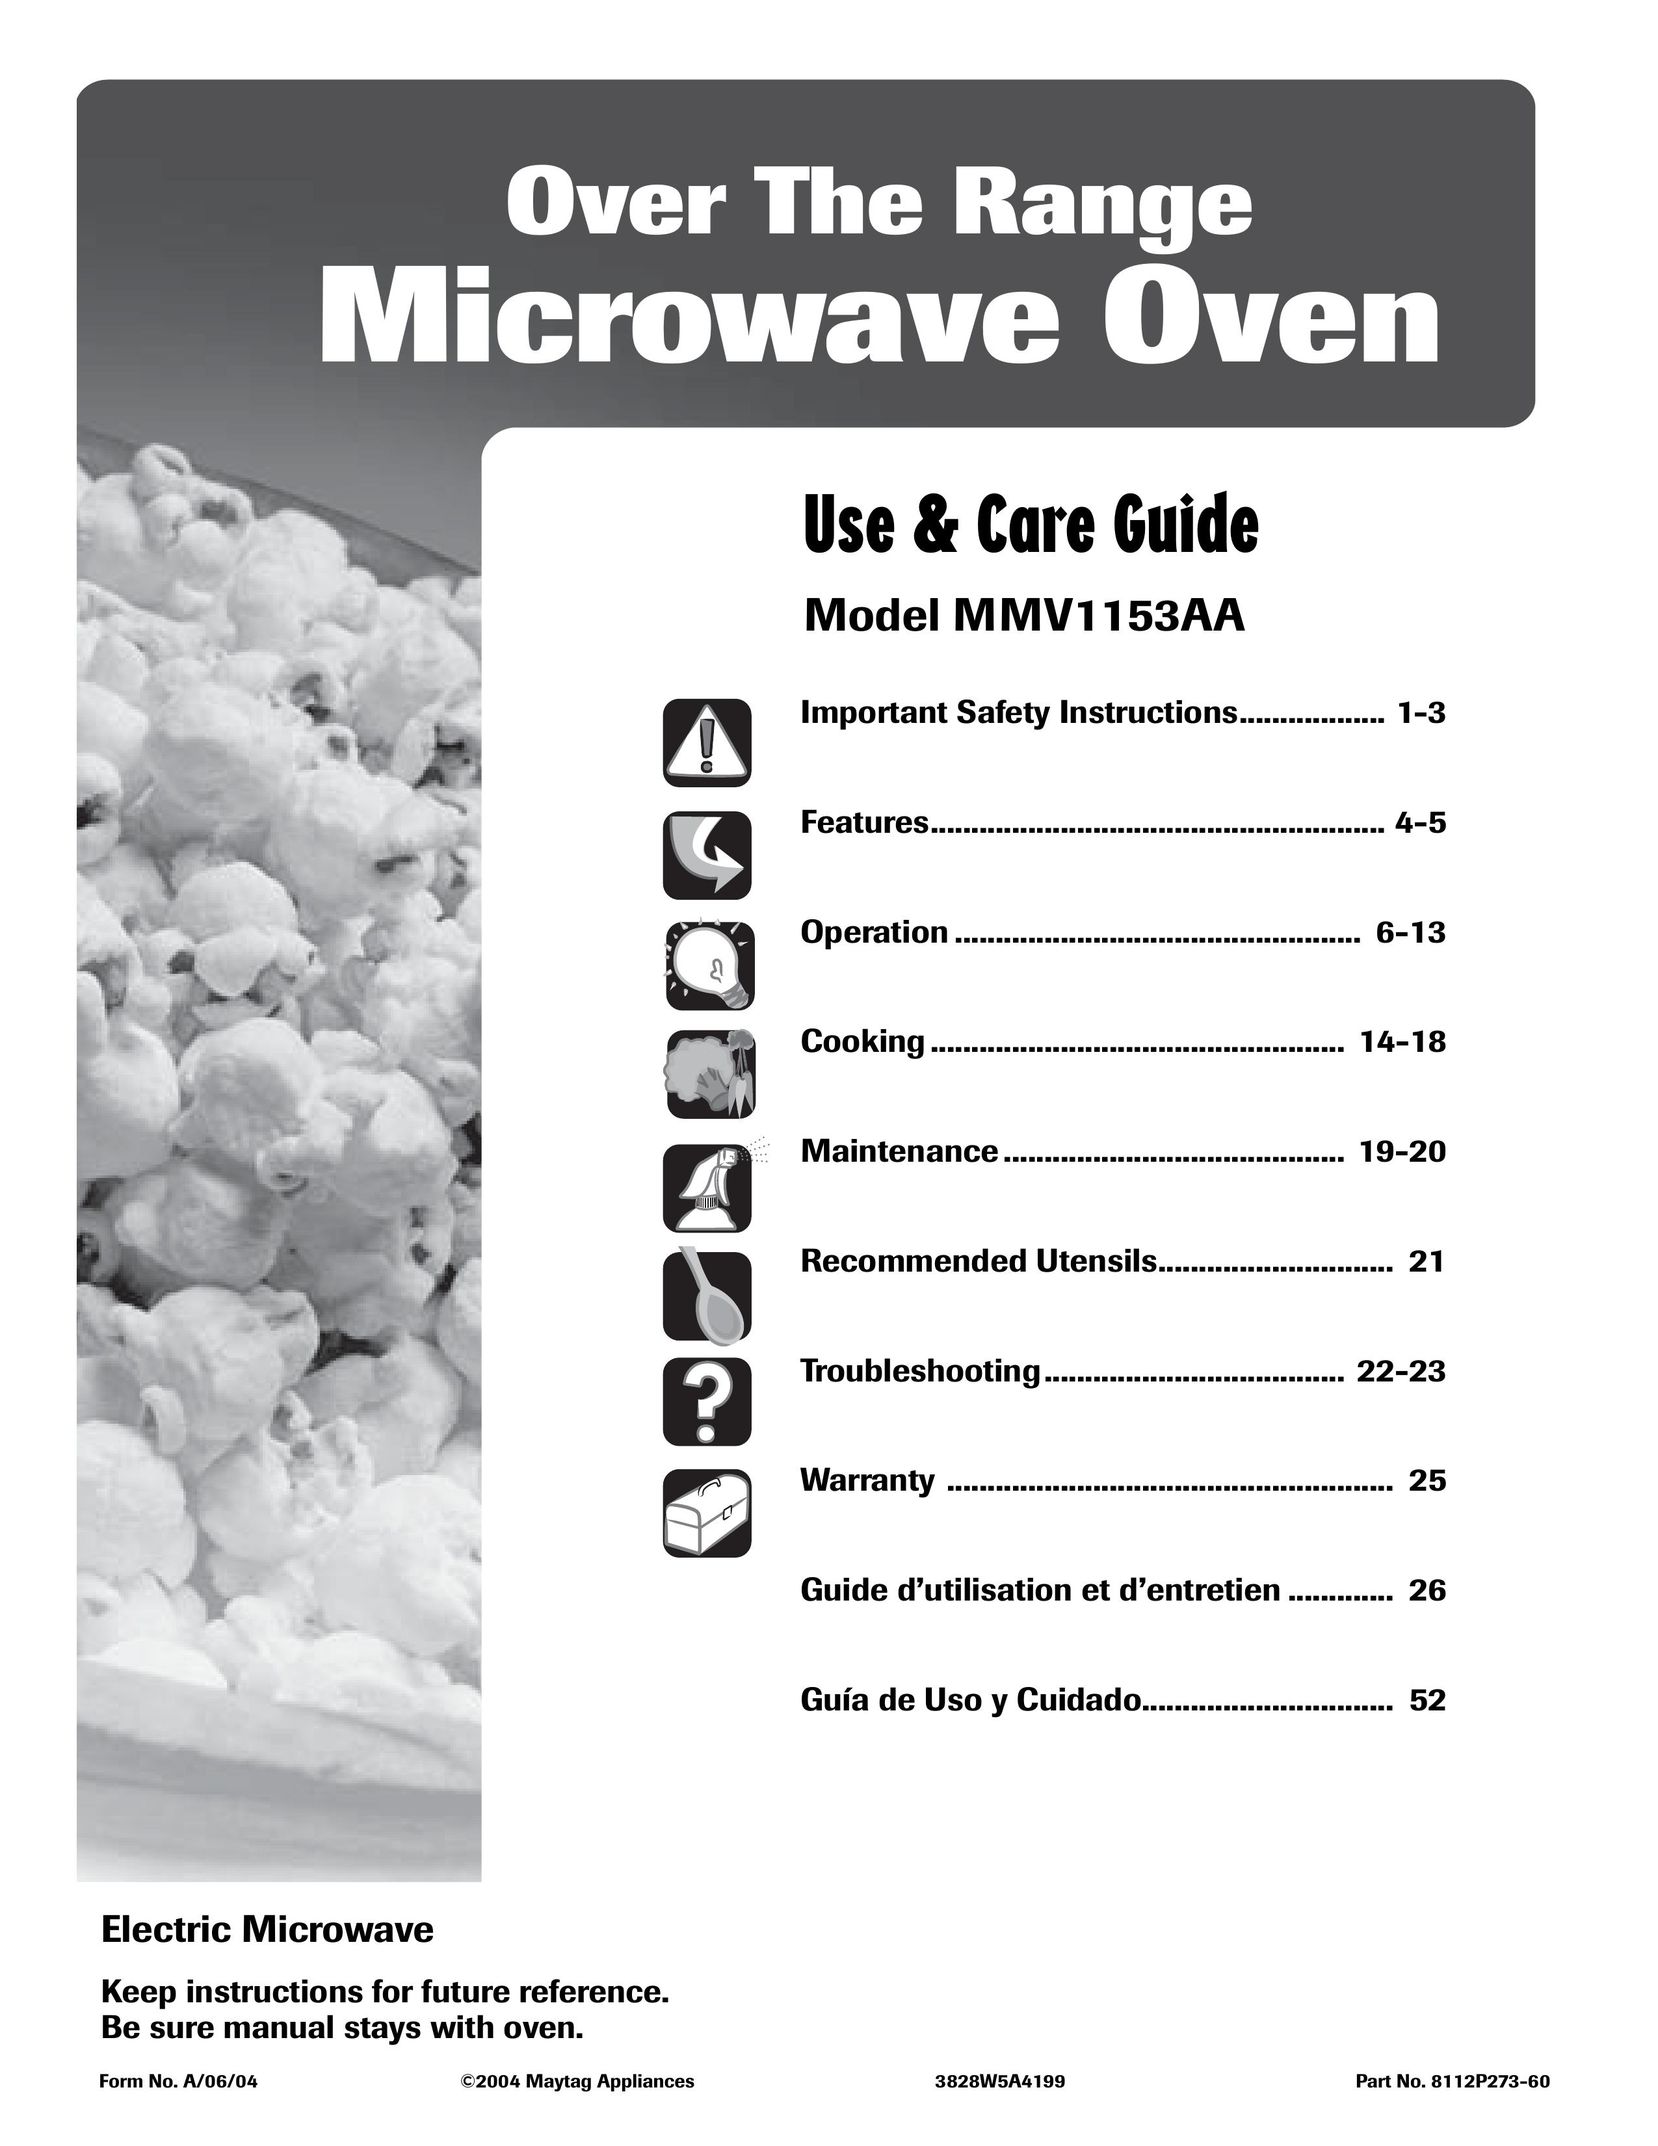 Maytag MMV1153AA Microwave Oven User Manual